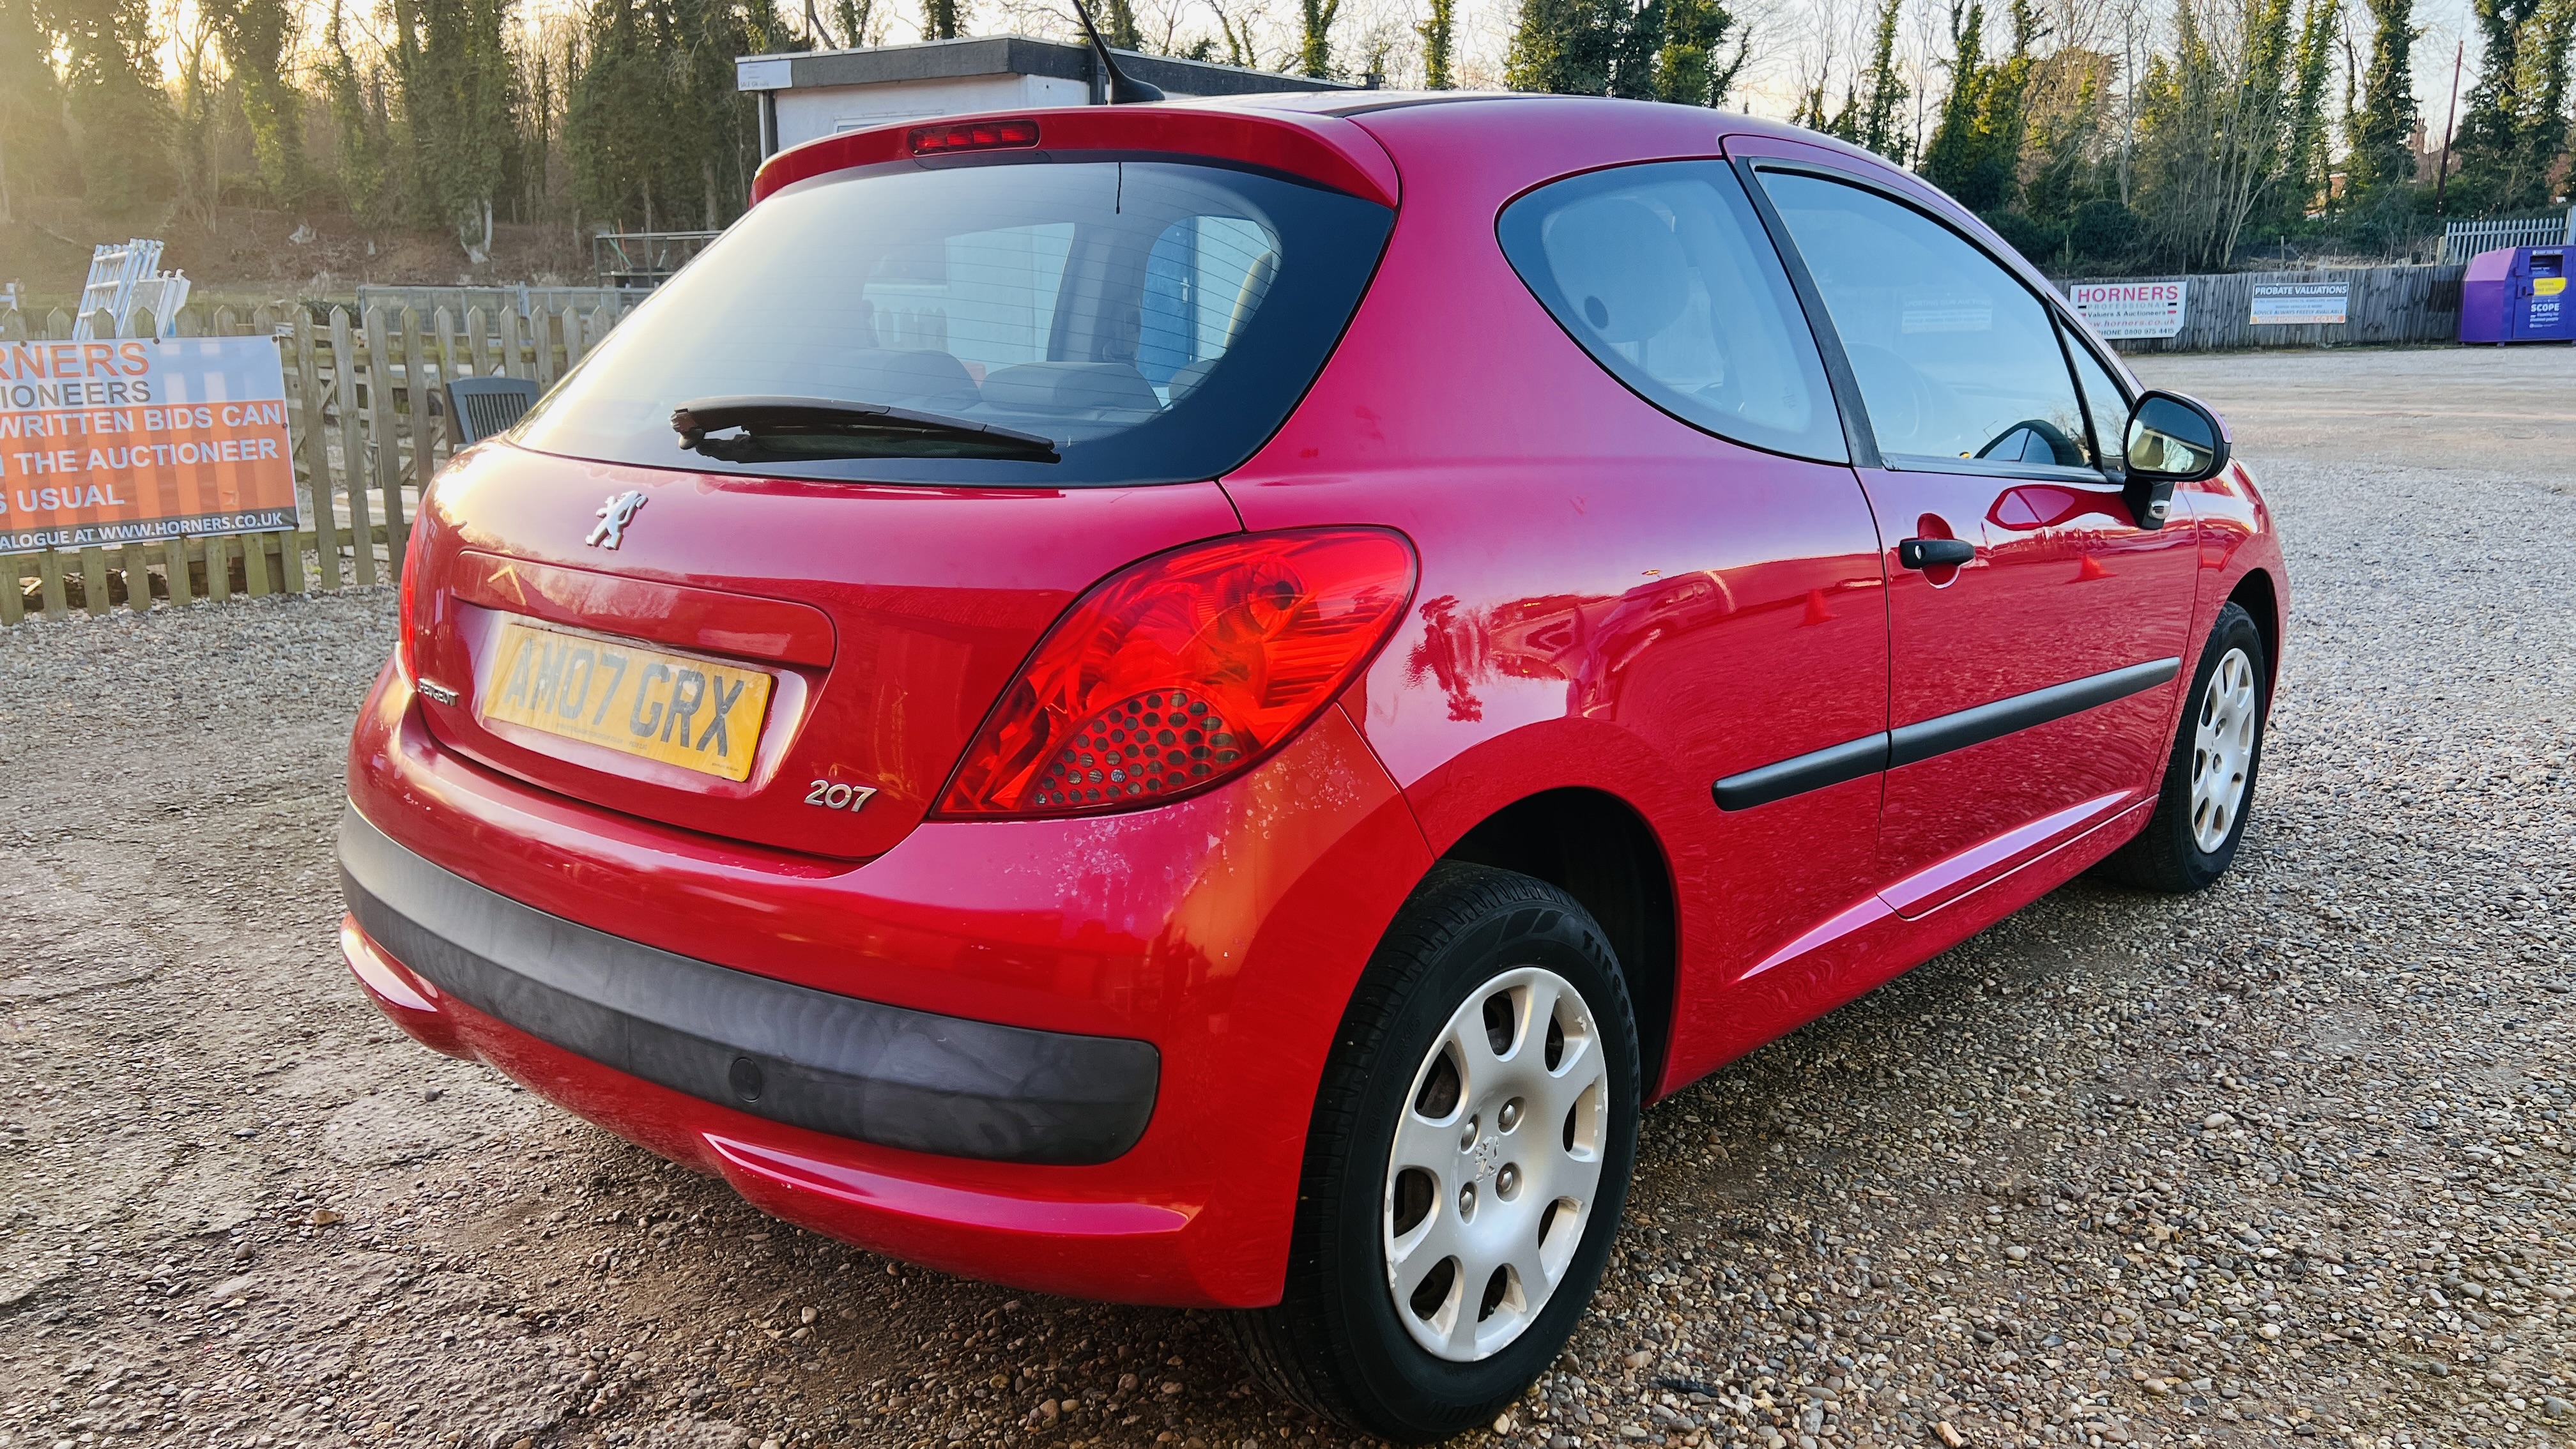 AM07 GRX PEUGEOT 207 URBAN 1360CC PETROL. ODOMETER READING: 36,467. FIRST REGISTERED 08/08/2007. - Image 6 of 16